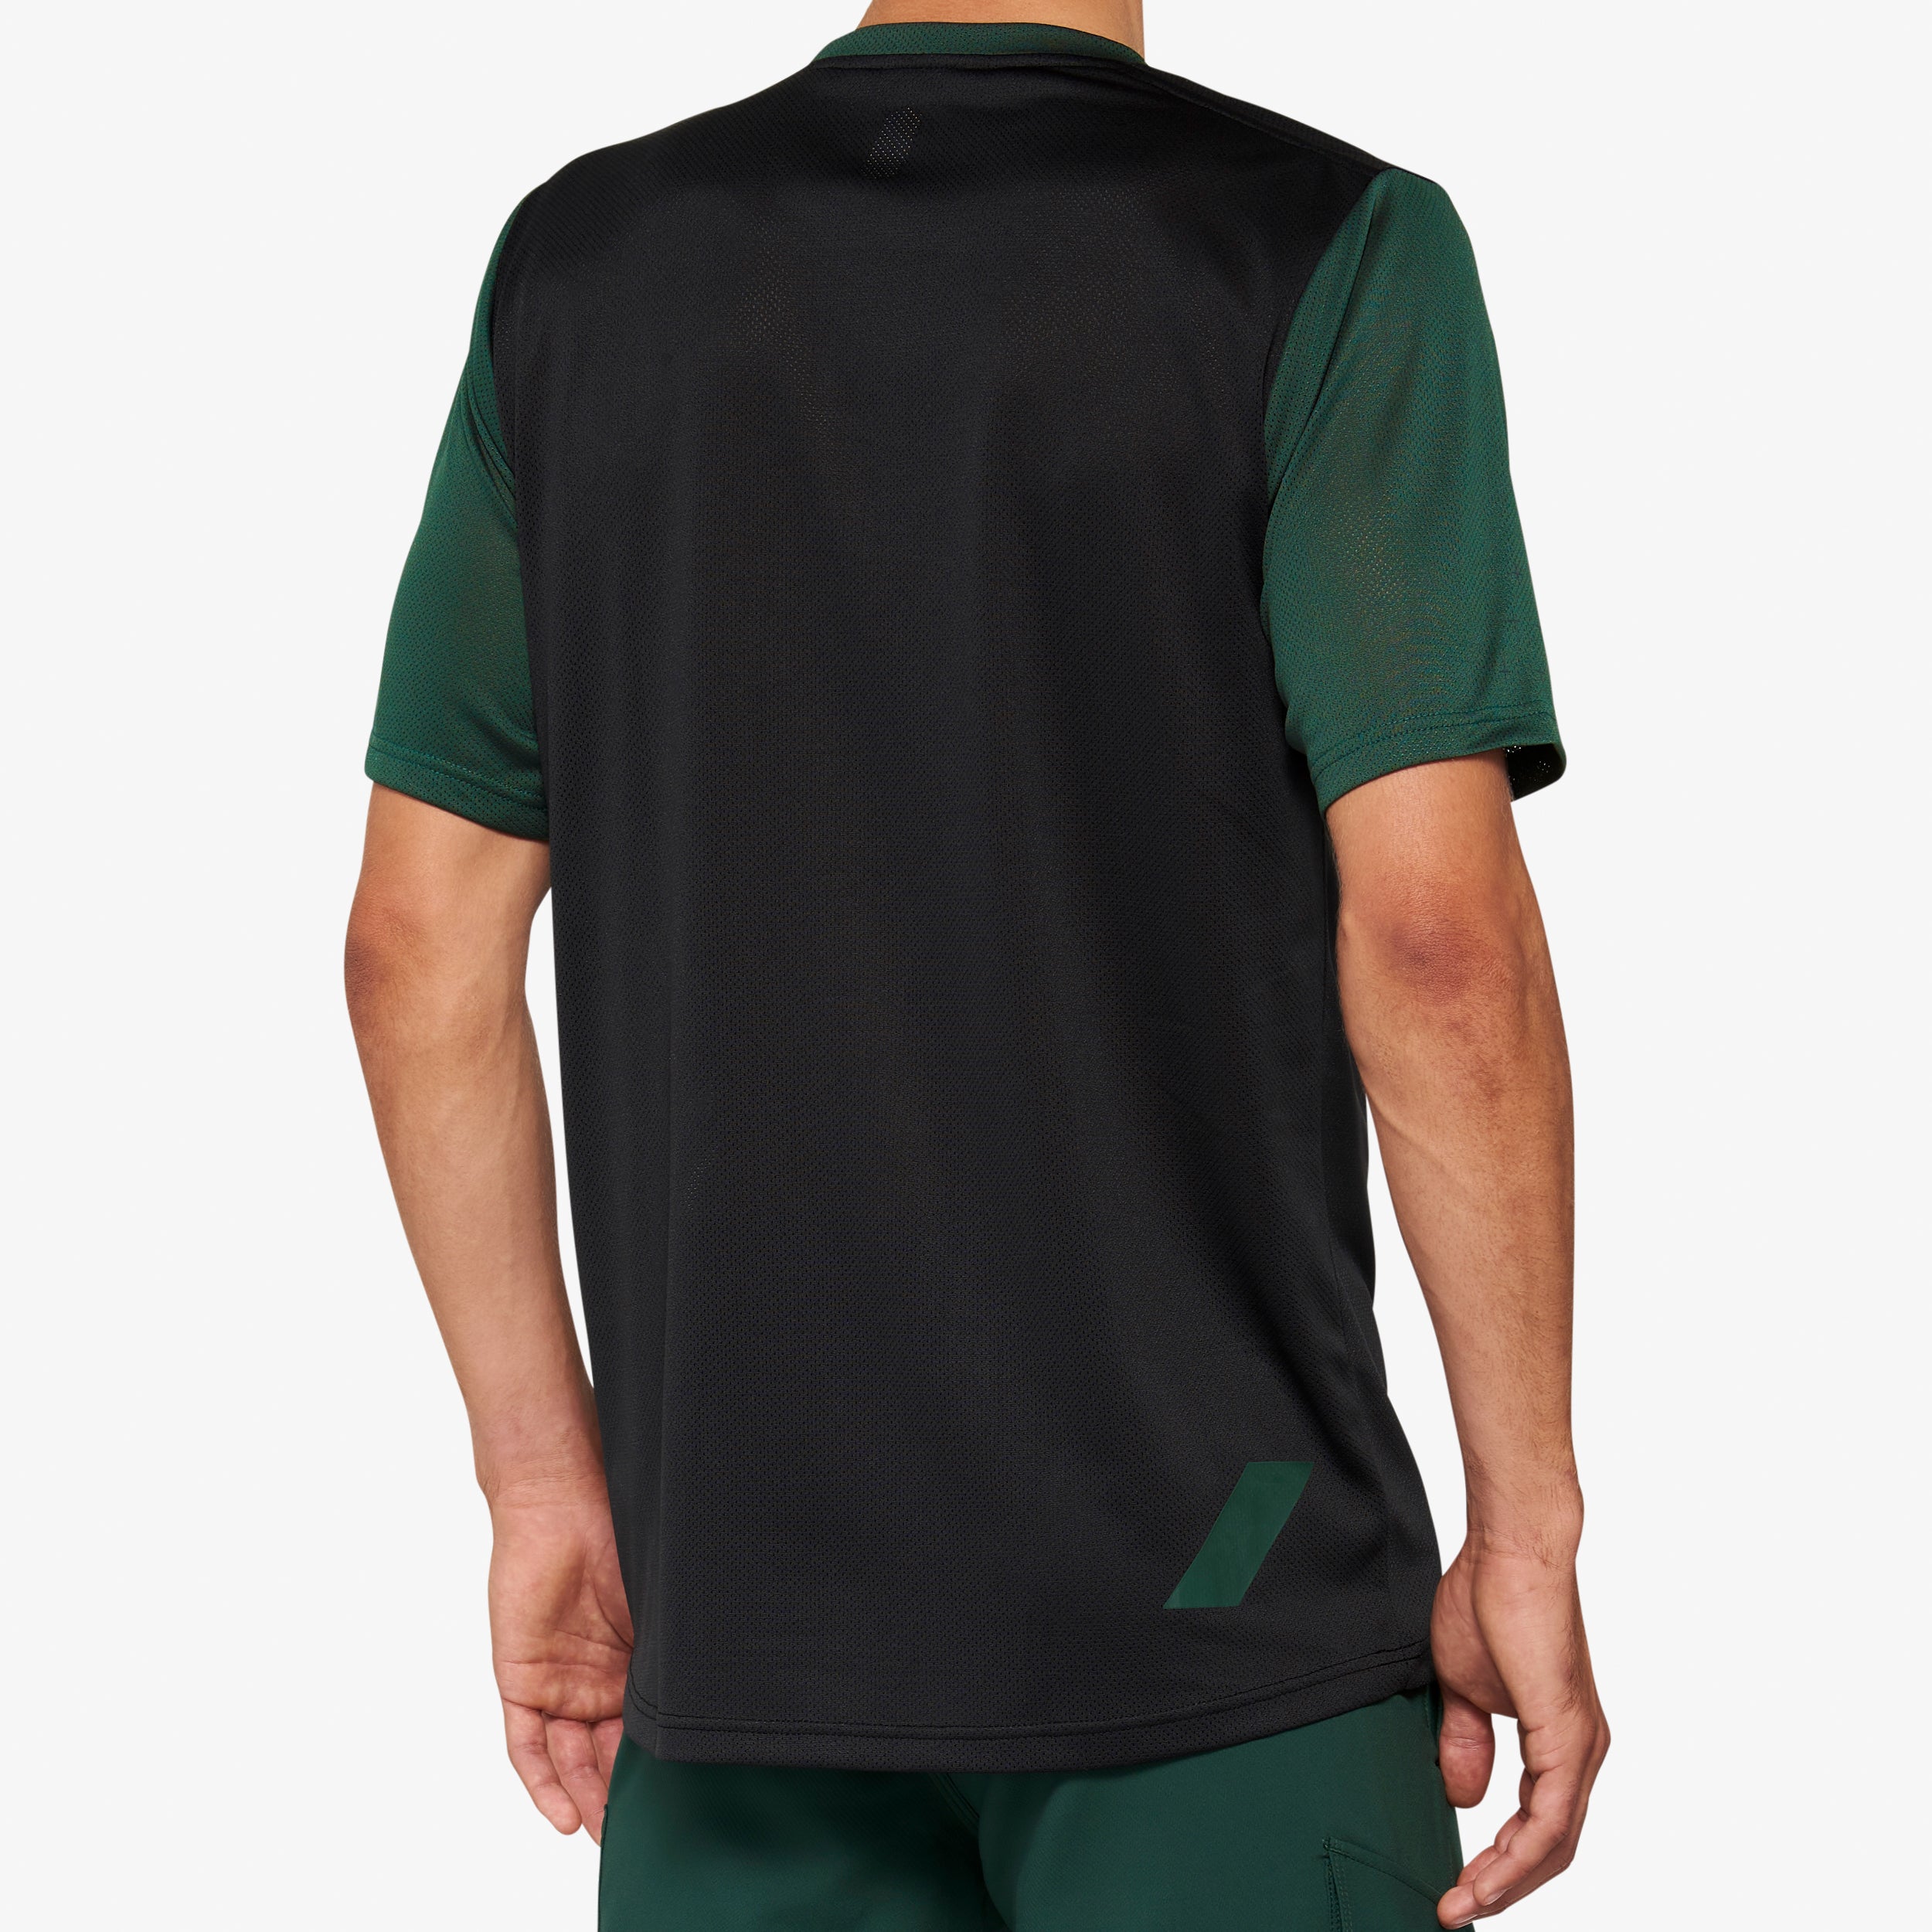 RIDECAMP Short Sleeve Jersey Black/Forest Green